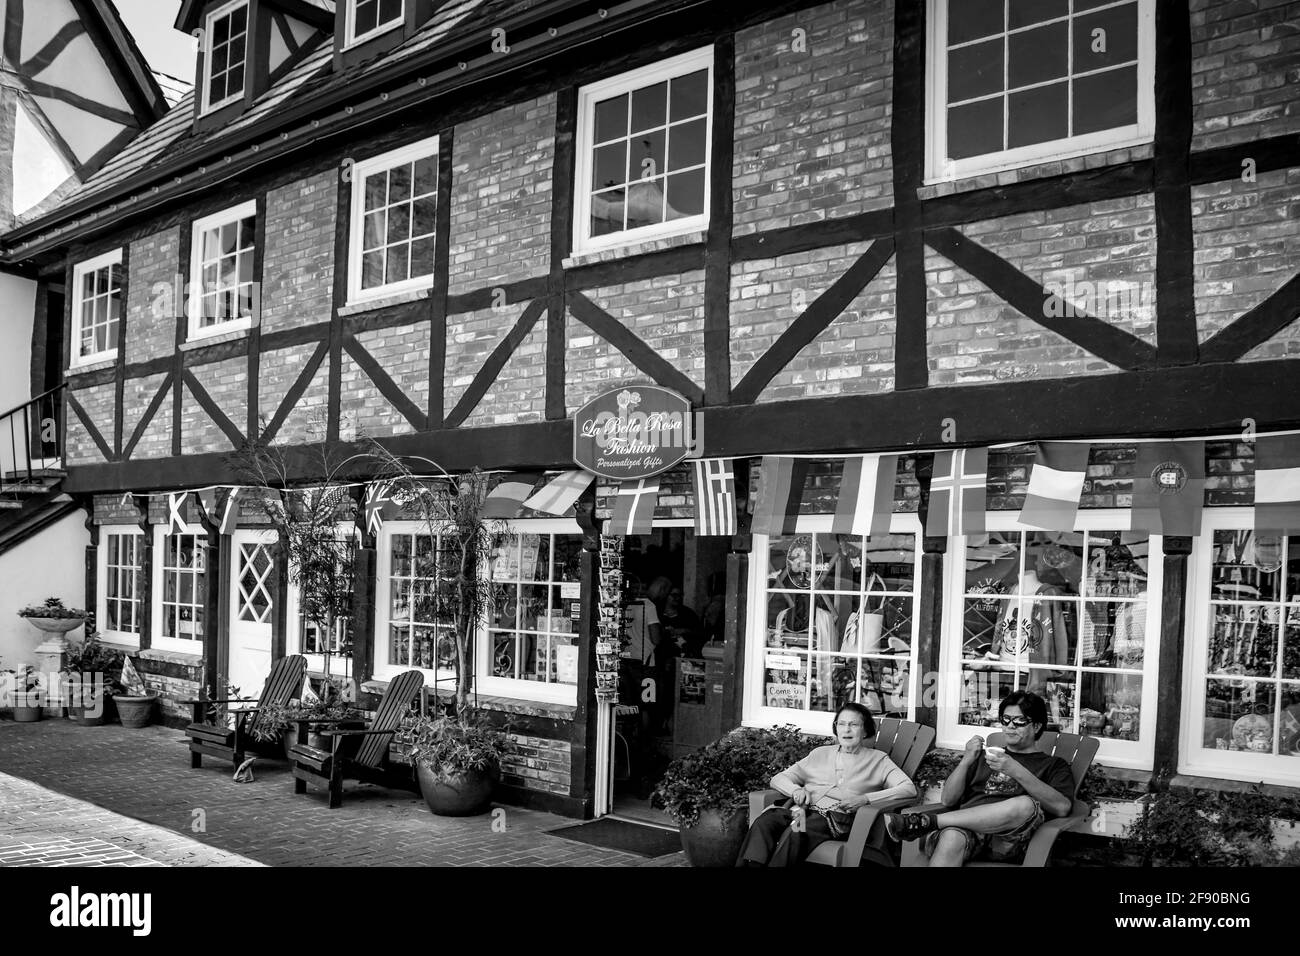 An inviting entrance to a shop in a Bavarian half timber style building with garden chairs for tourists in the faux Danish village, Solvang, CA, B&W Stock Photo